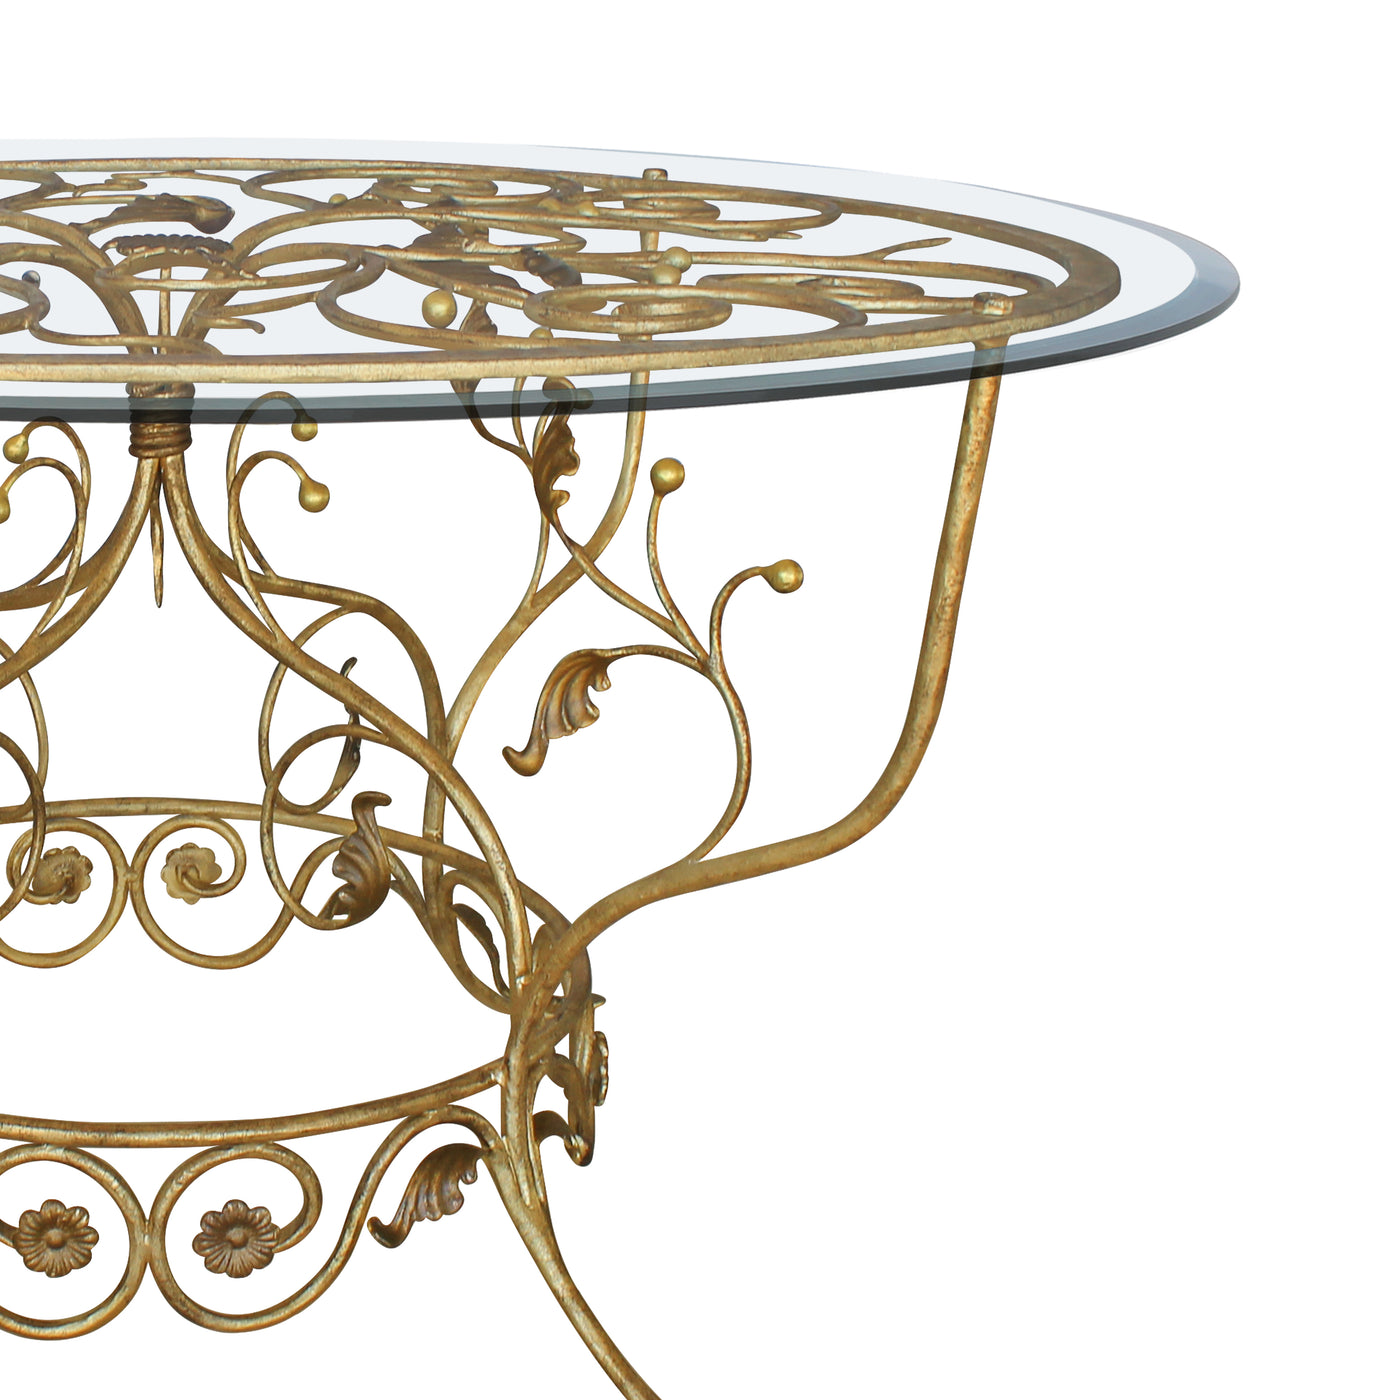 Close up of a classical wrought iron entryway table with scrolls and leaves painted in an antique golden finish